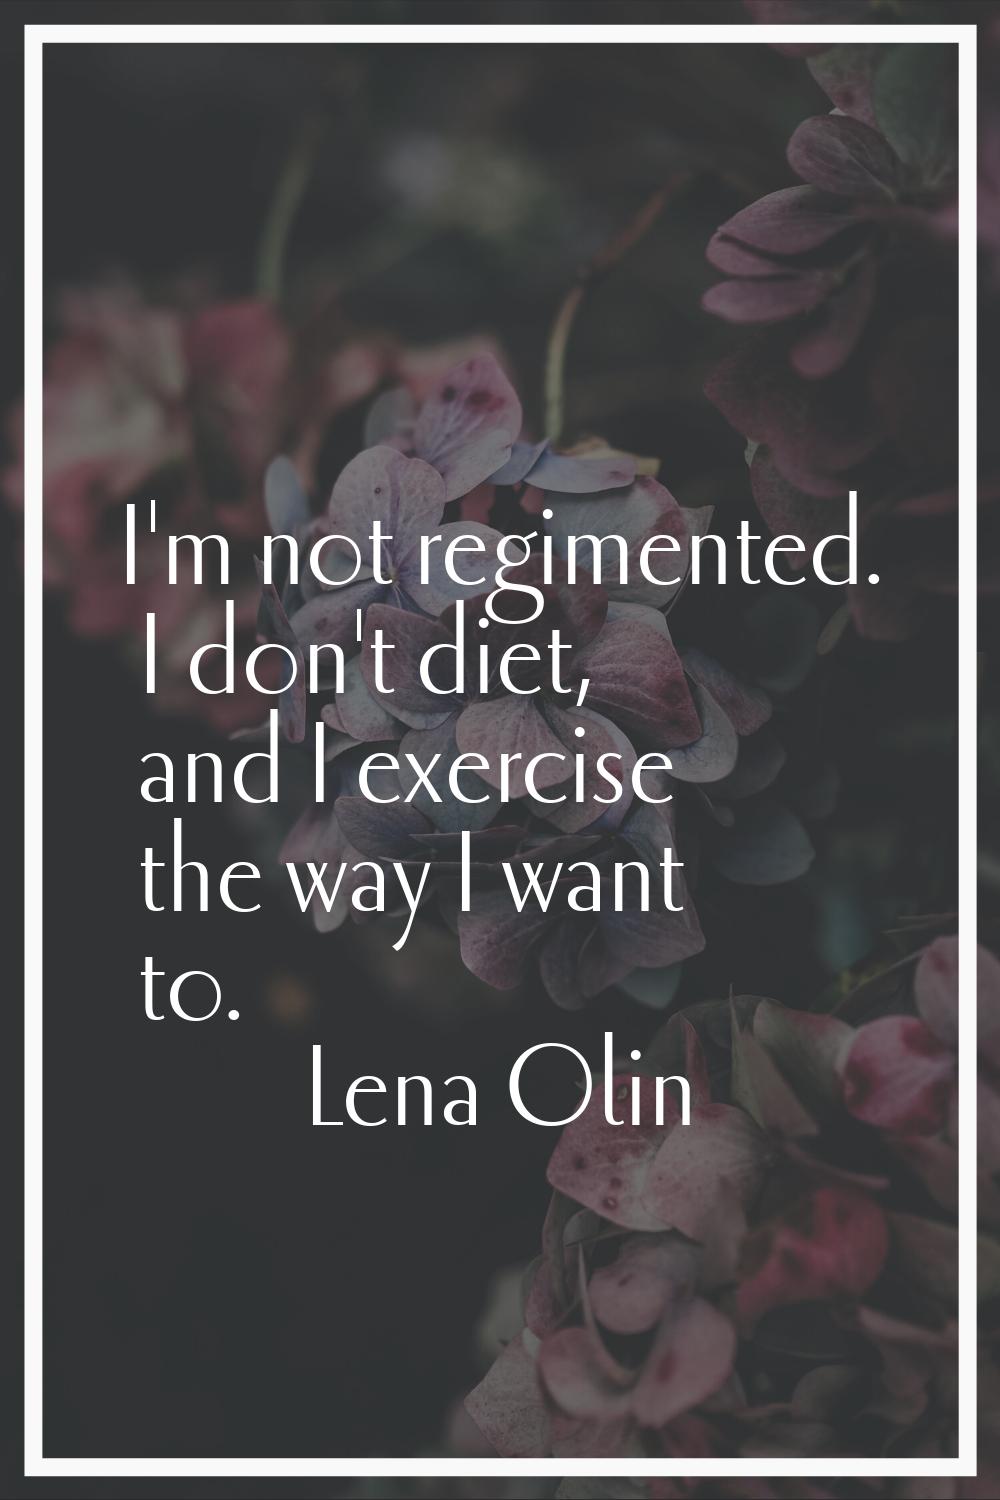 I'm not regimented. I don't diet, and I exercise the way I want to.